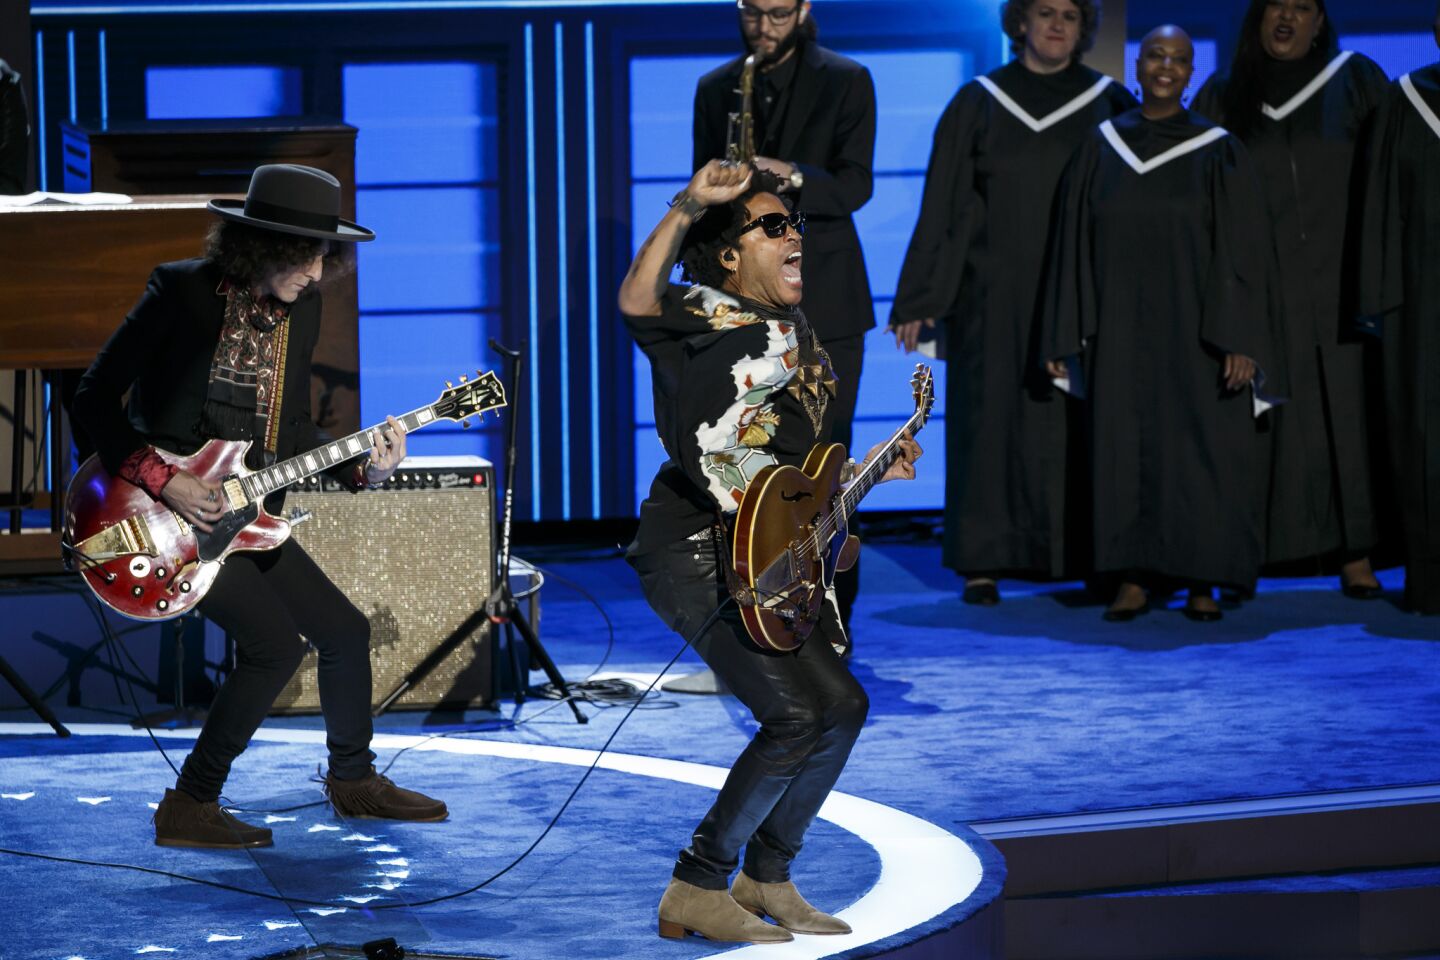 Lenny Kravitz performs at the 2016 Democratic National Convention in Philadelphia.